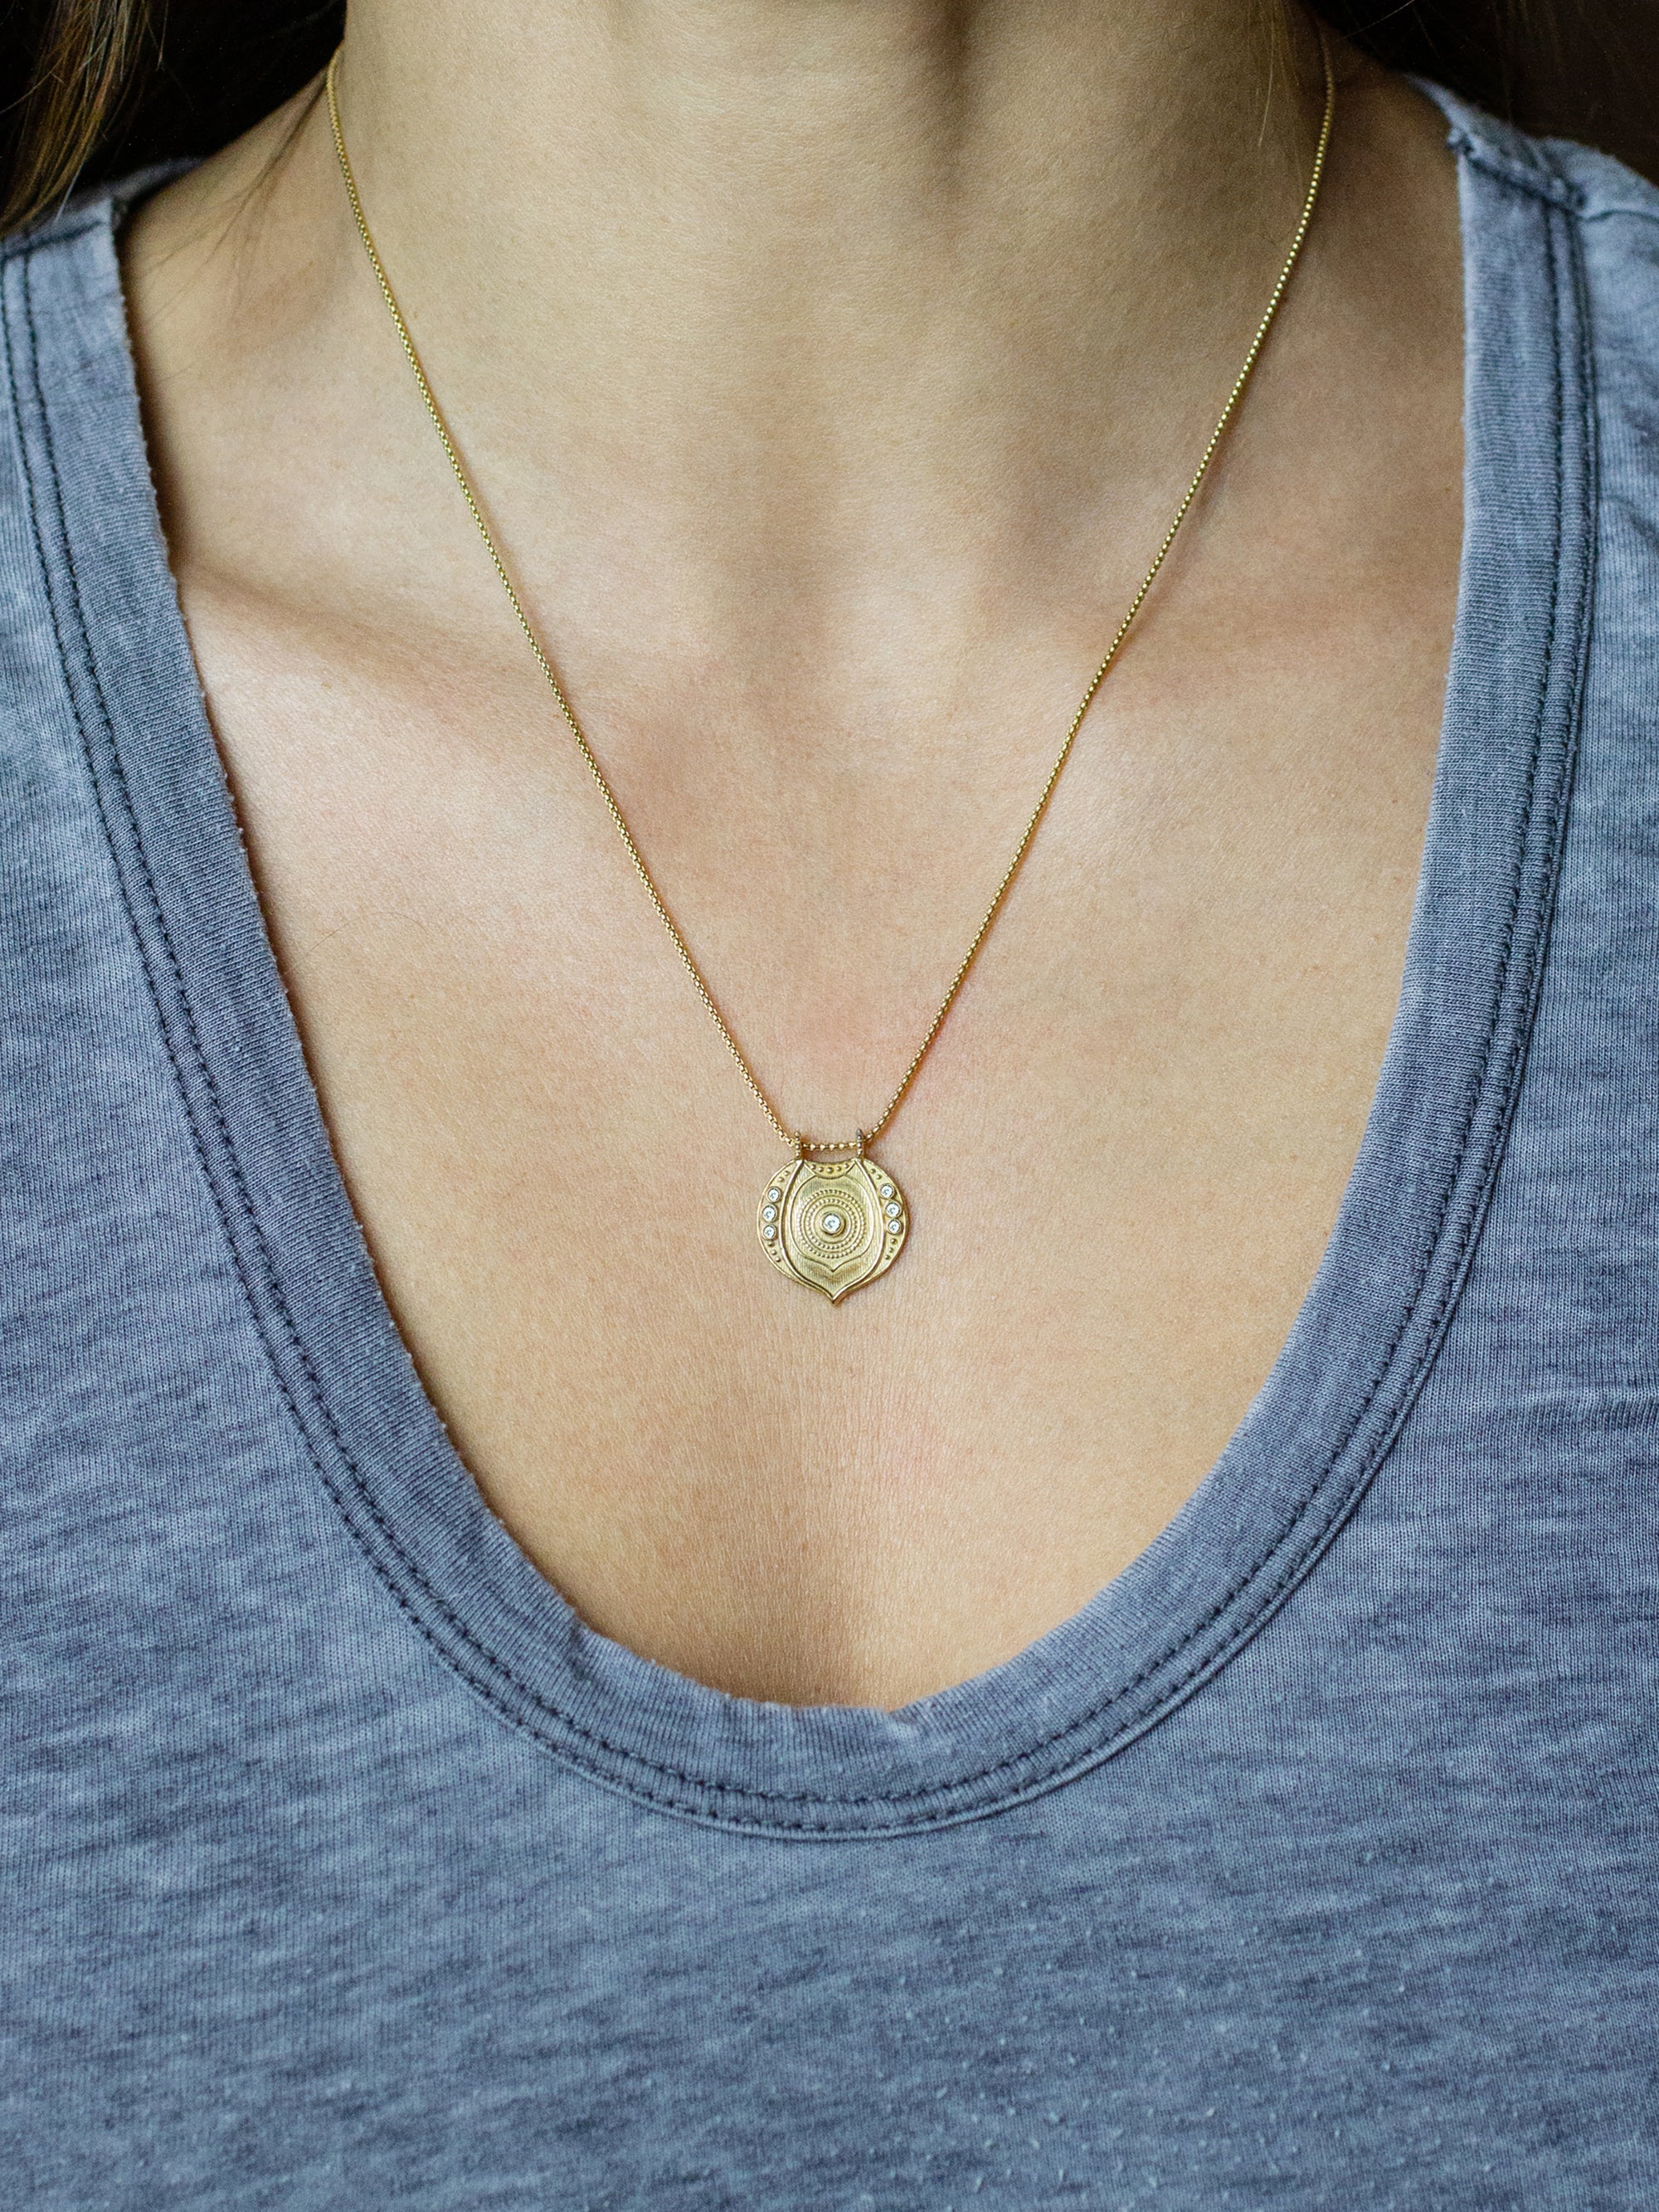 Aura Necklace "live in light"